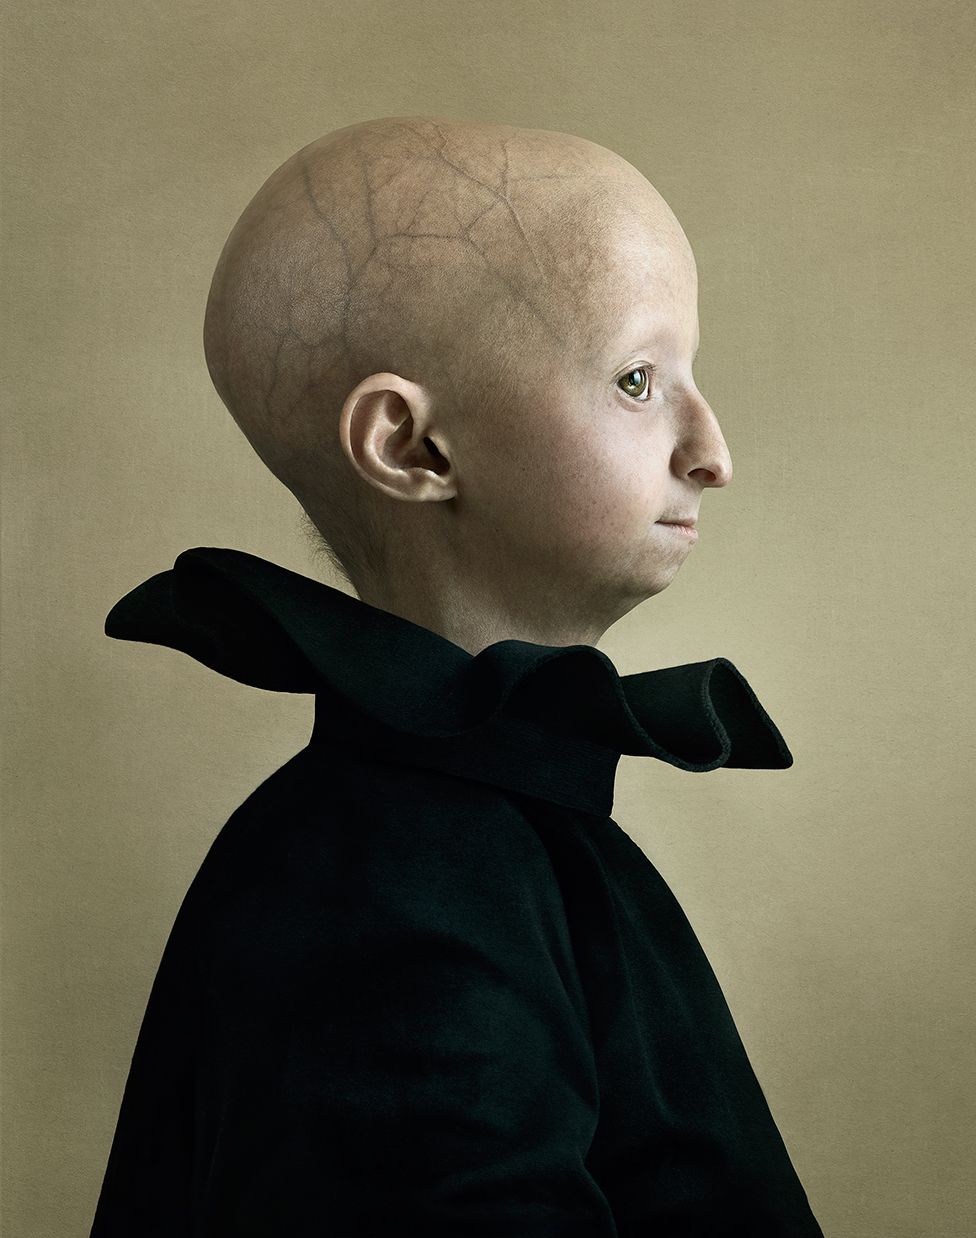 A child with progeria, a rare medical condition, poses for a portrait